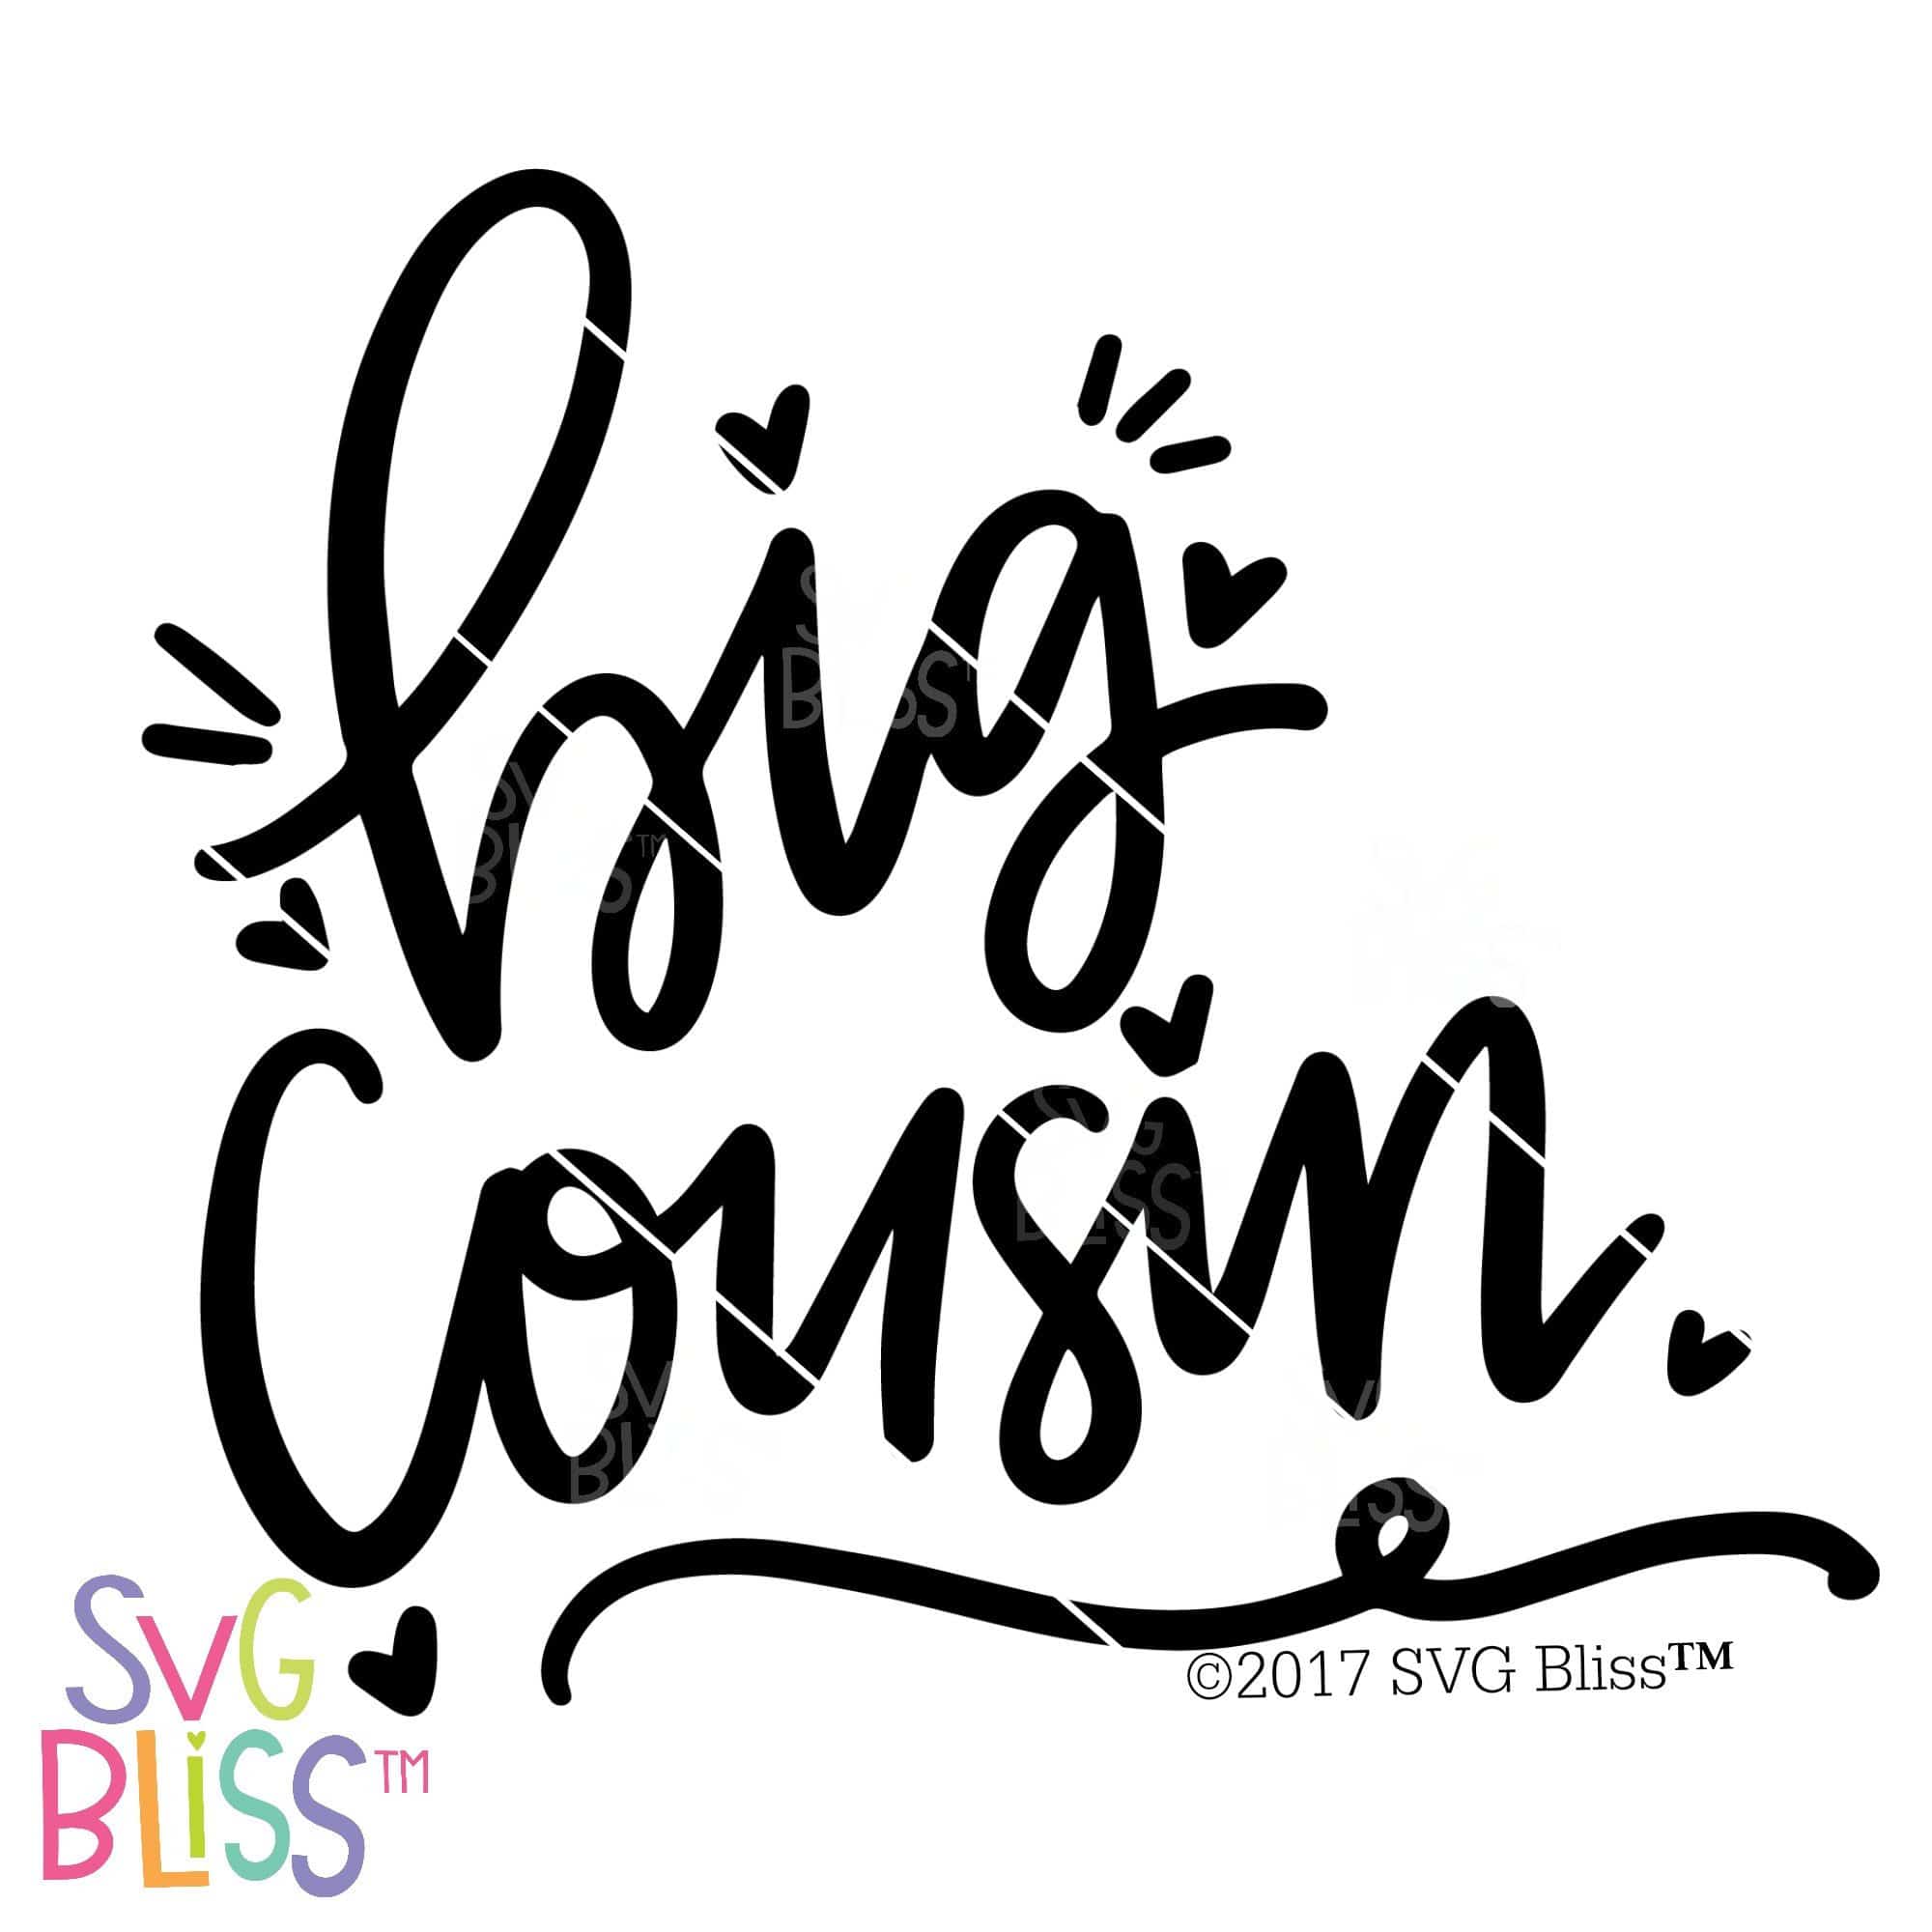 Download Clip Art Sisters New Baby Svg File Baby Announcement Svg Little Brother Svg Baby Cousin Svg Big Cousin Cut File Big Cousin Svg Cut File Art Collectibles